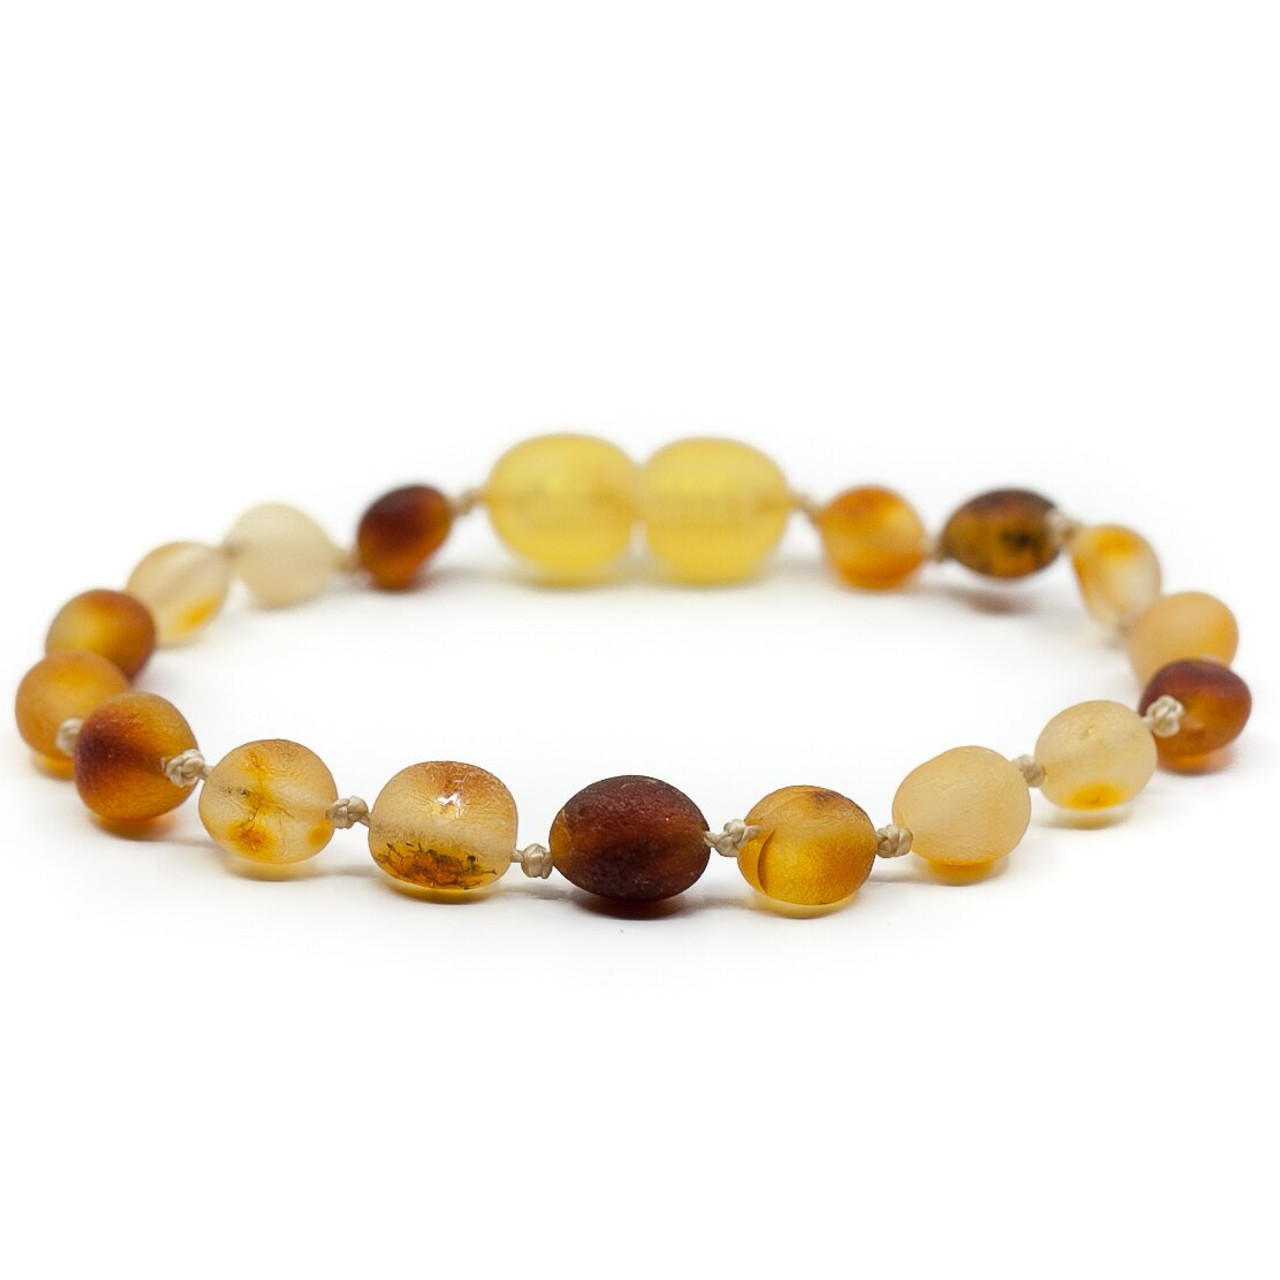 amber beads for pain